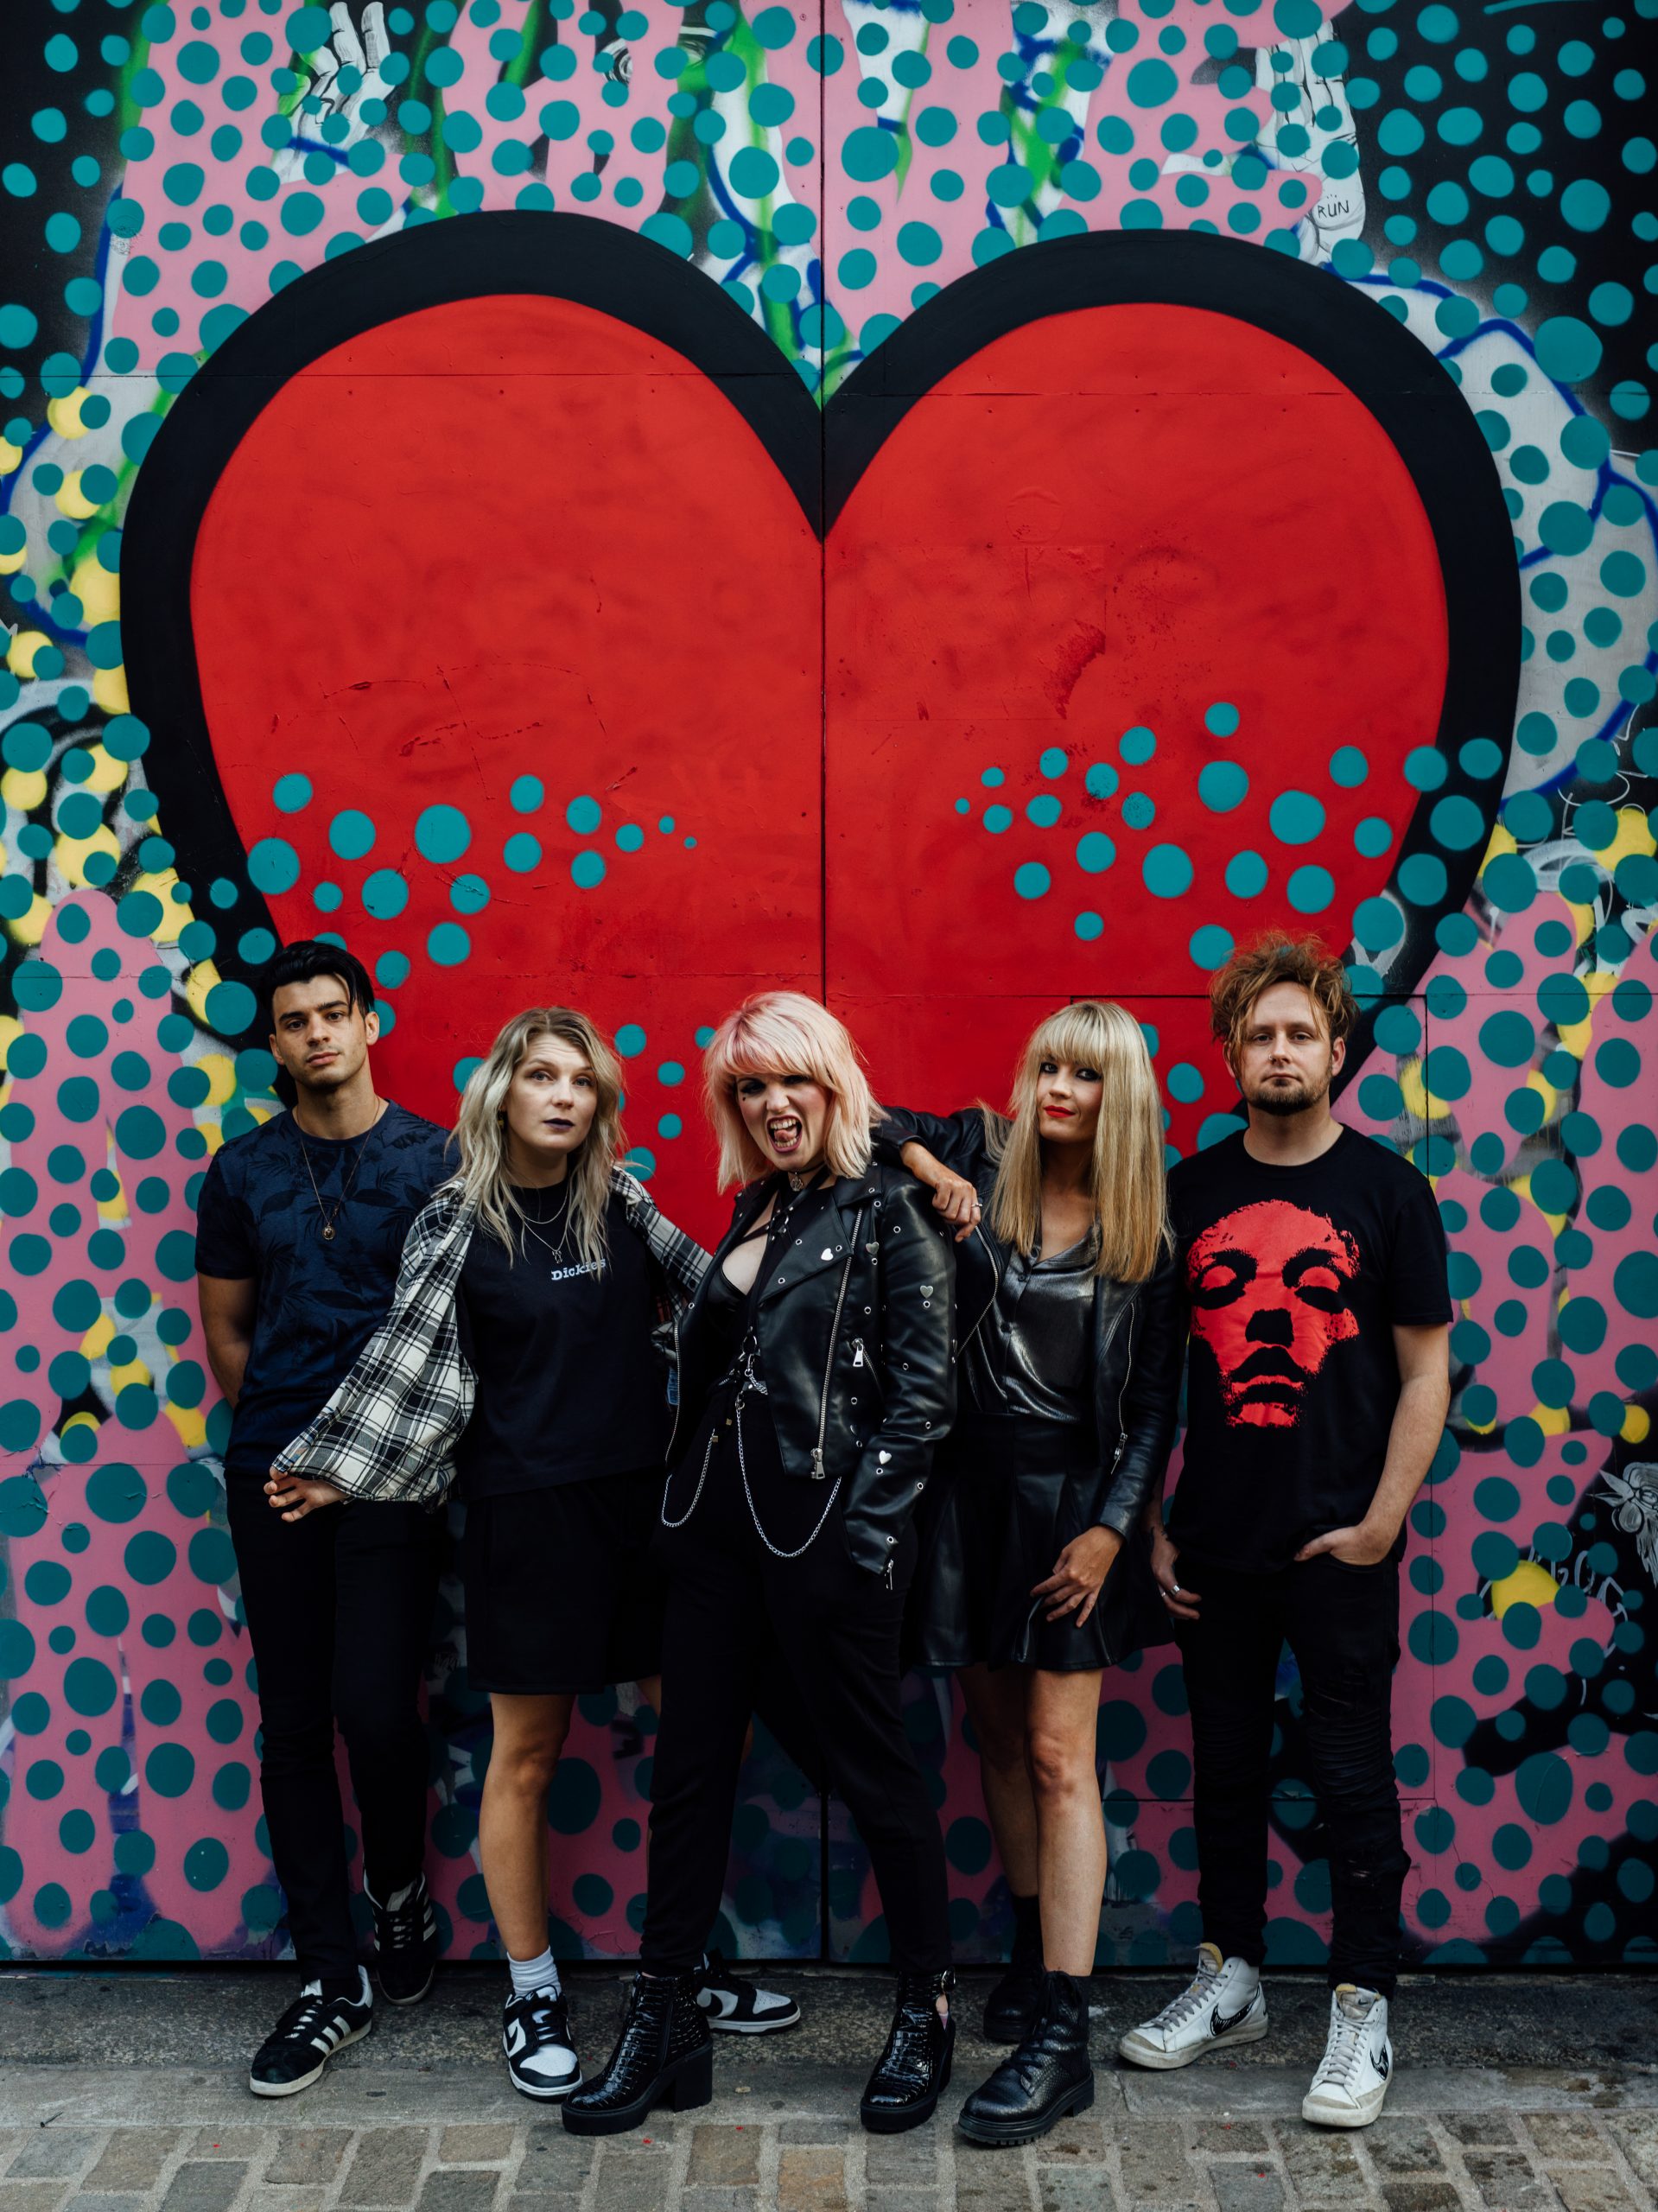 The five members of band Salvation Jayne in front of a red heart on the wall